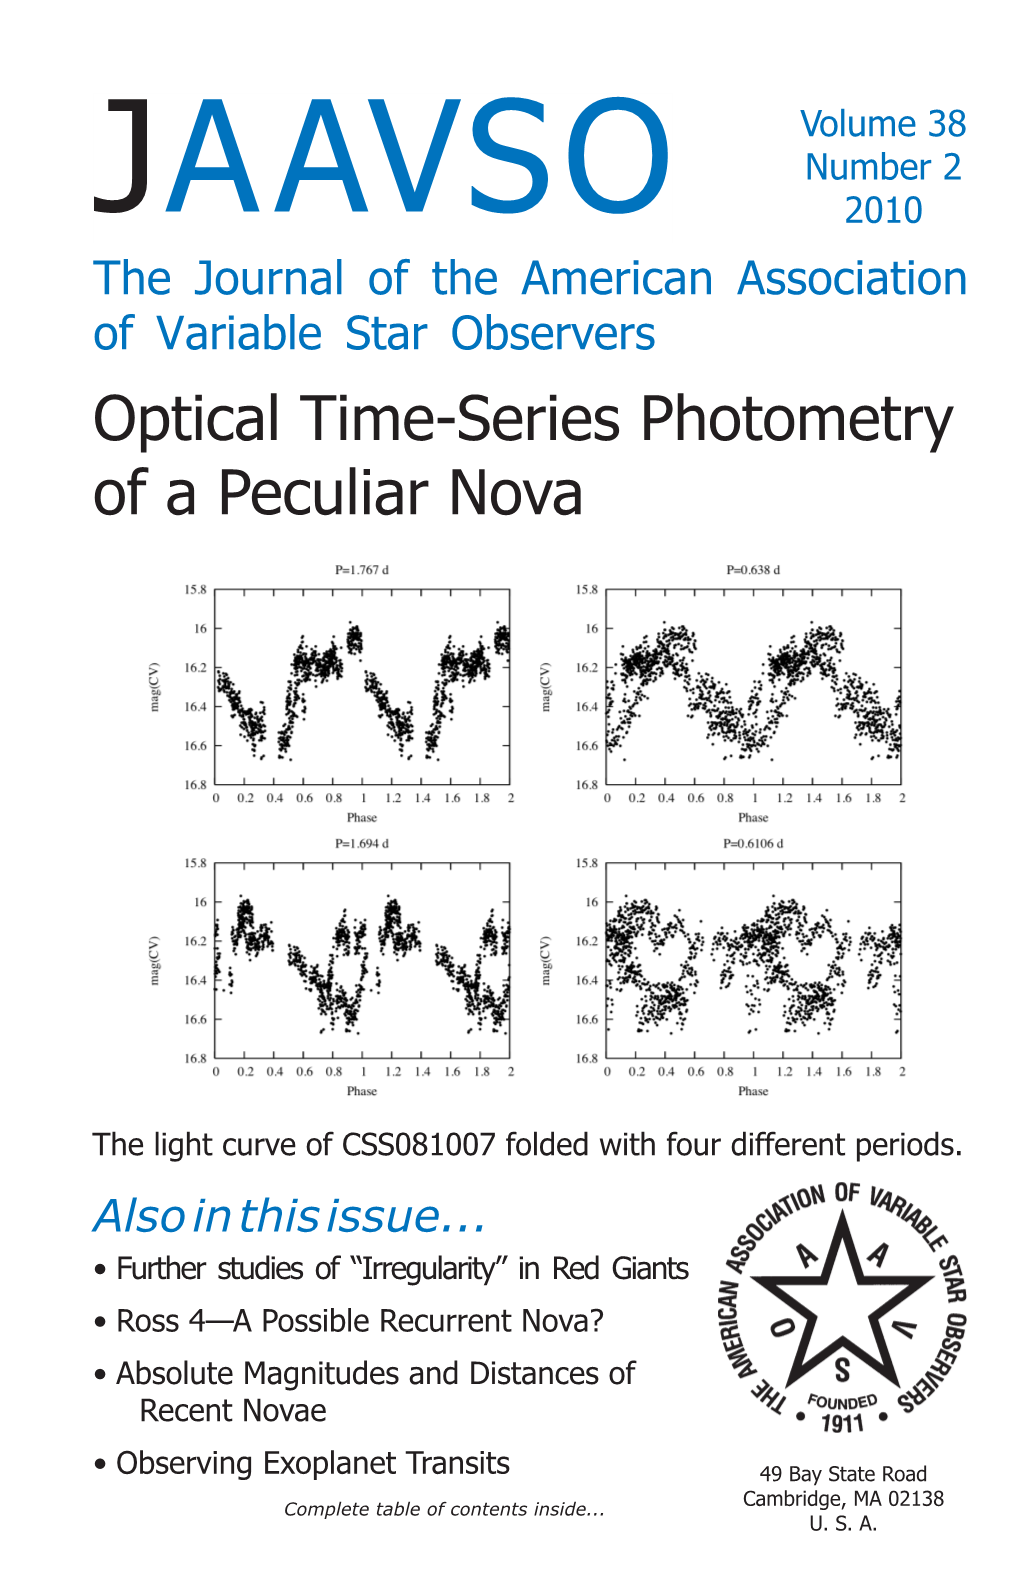 JAAVSO 2010 the Journal of the American Association of Variable Star Observers Optical Time-Series Photometry of a Peculiar Nova